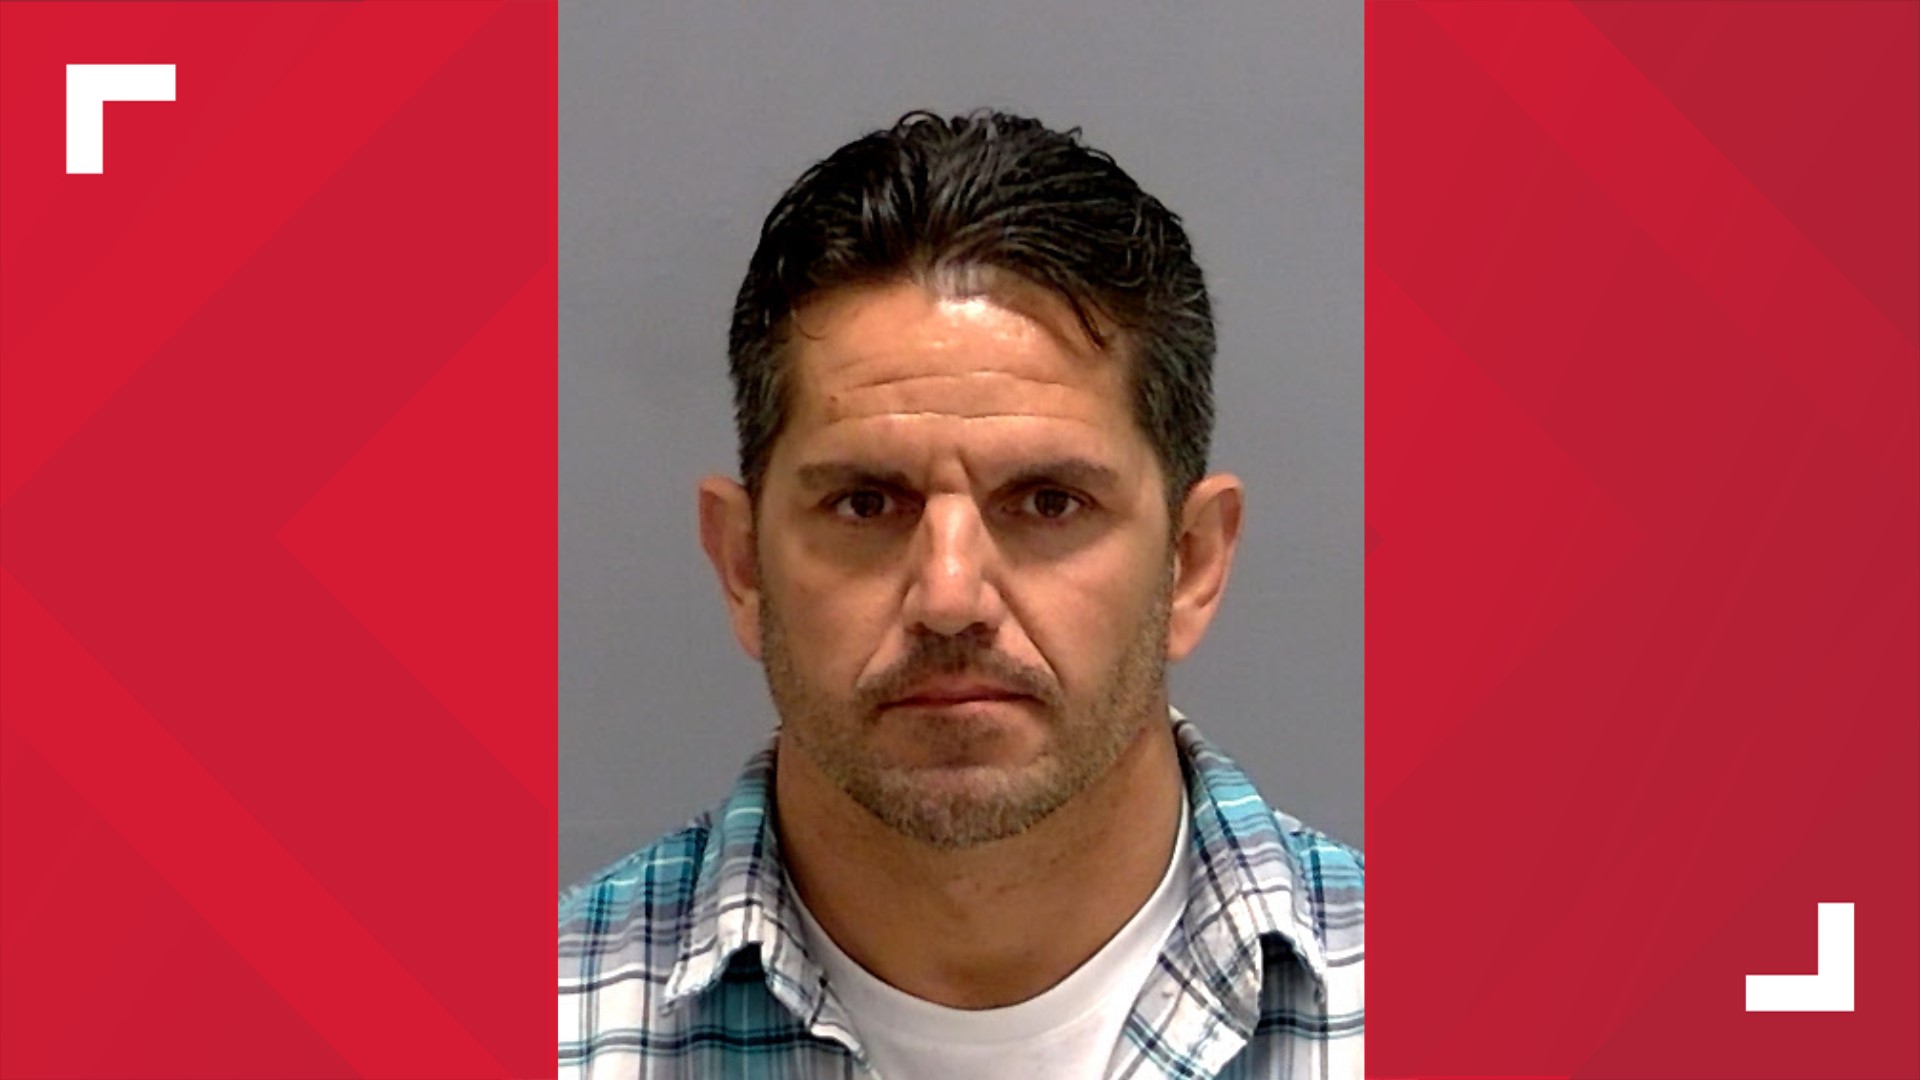 Michael Price, a 13-year veteran of IMPD currently assigned to the East District, was arrested early Saturday morning. He's accused of domestic battery and battery.